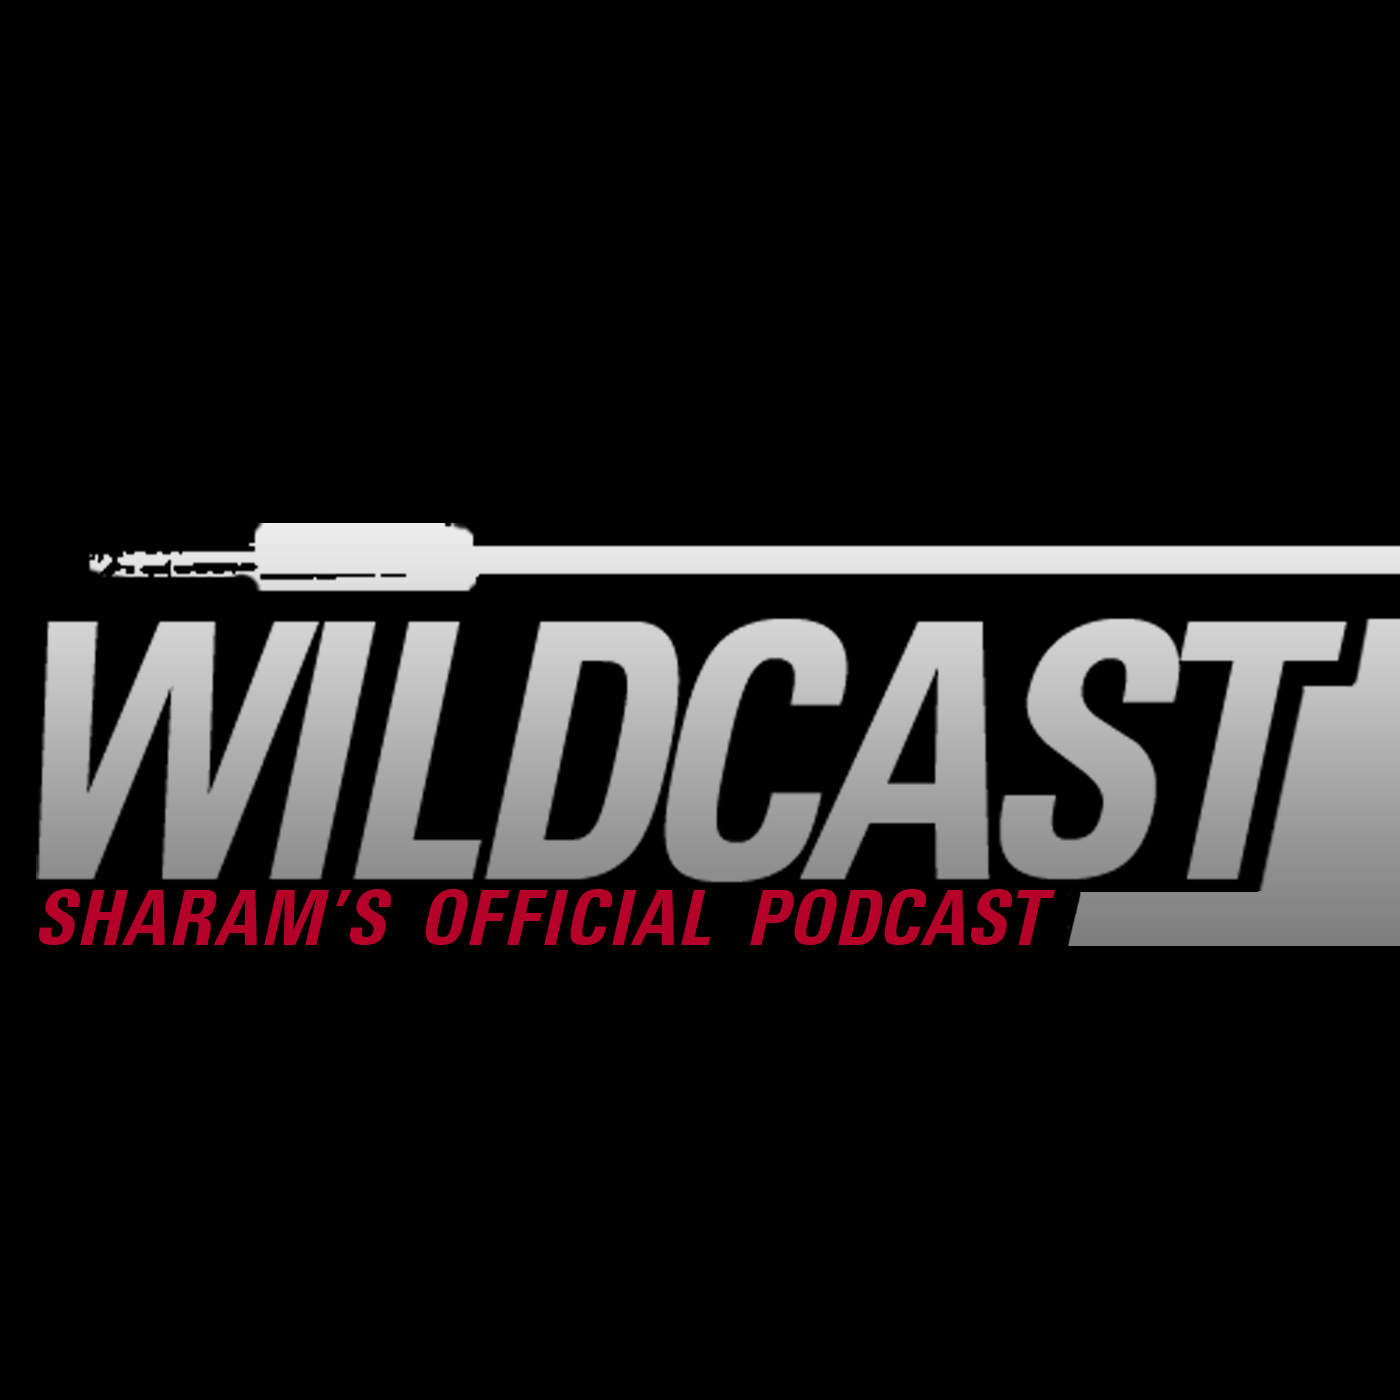 WILDCAST EPISODE 32 - Sharam's Official Podcast